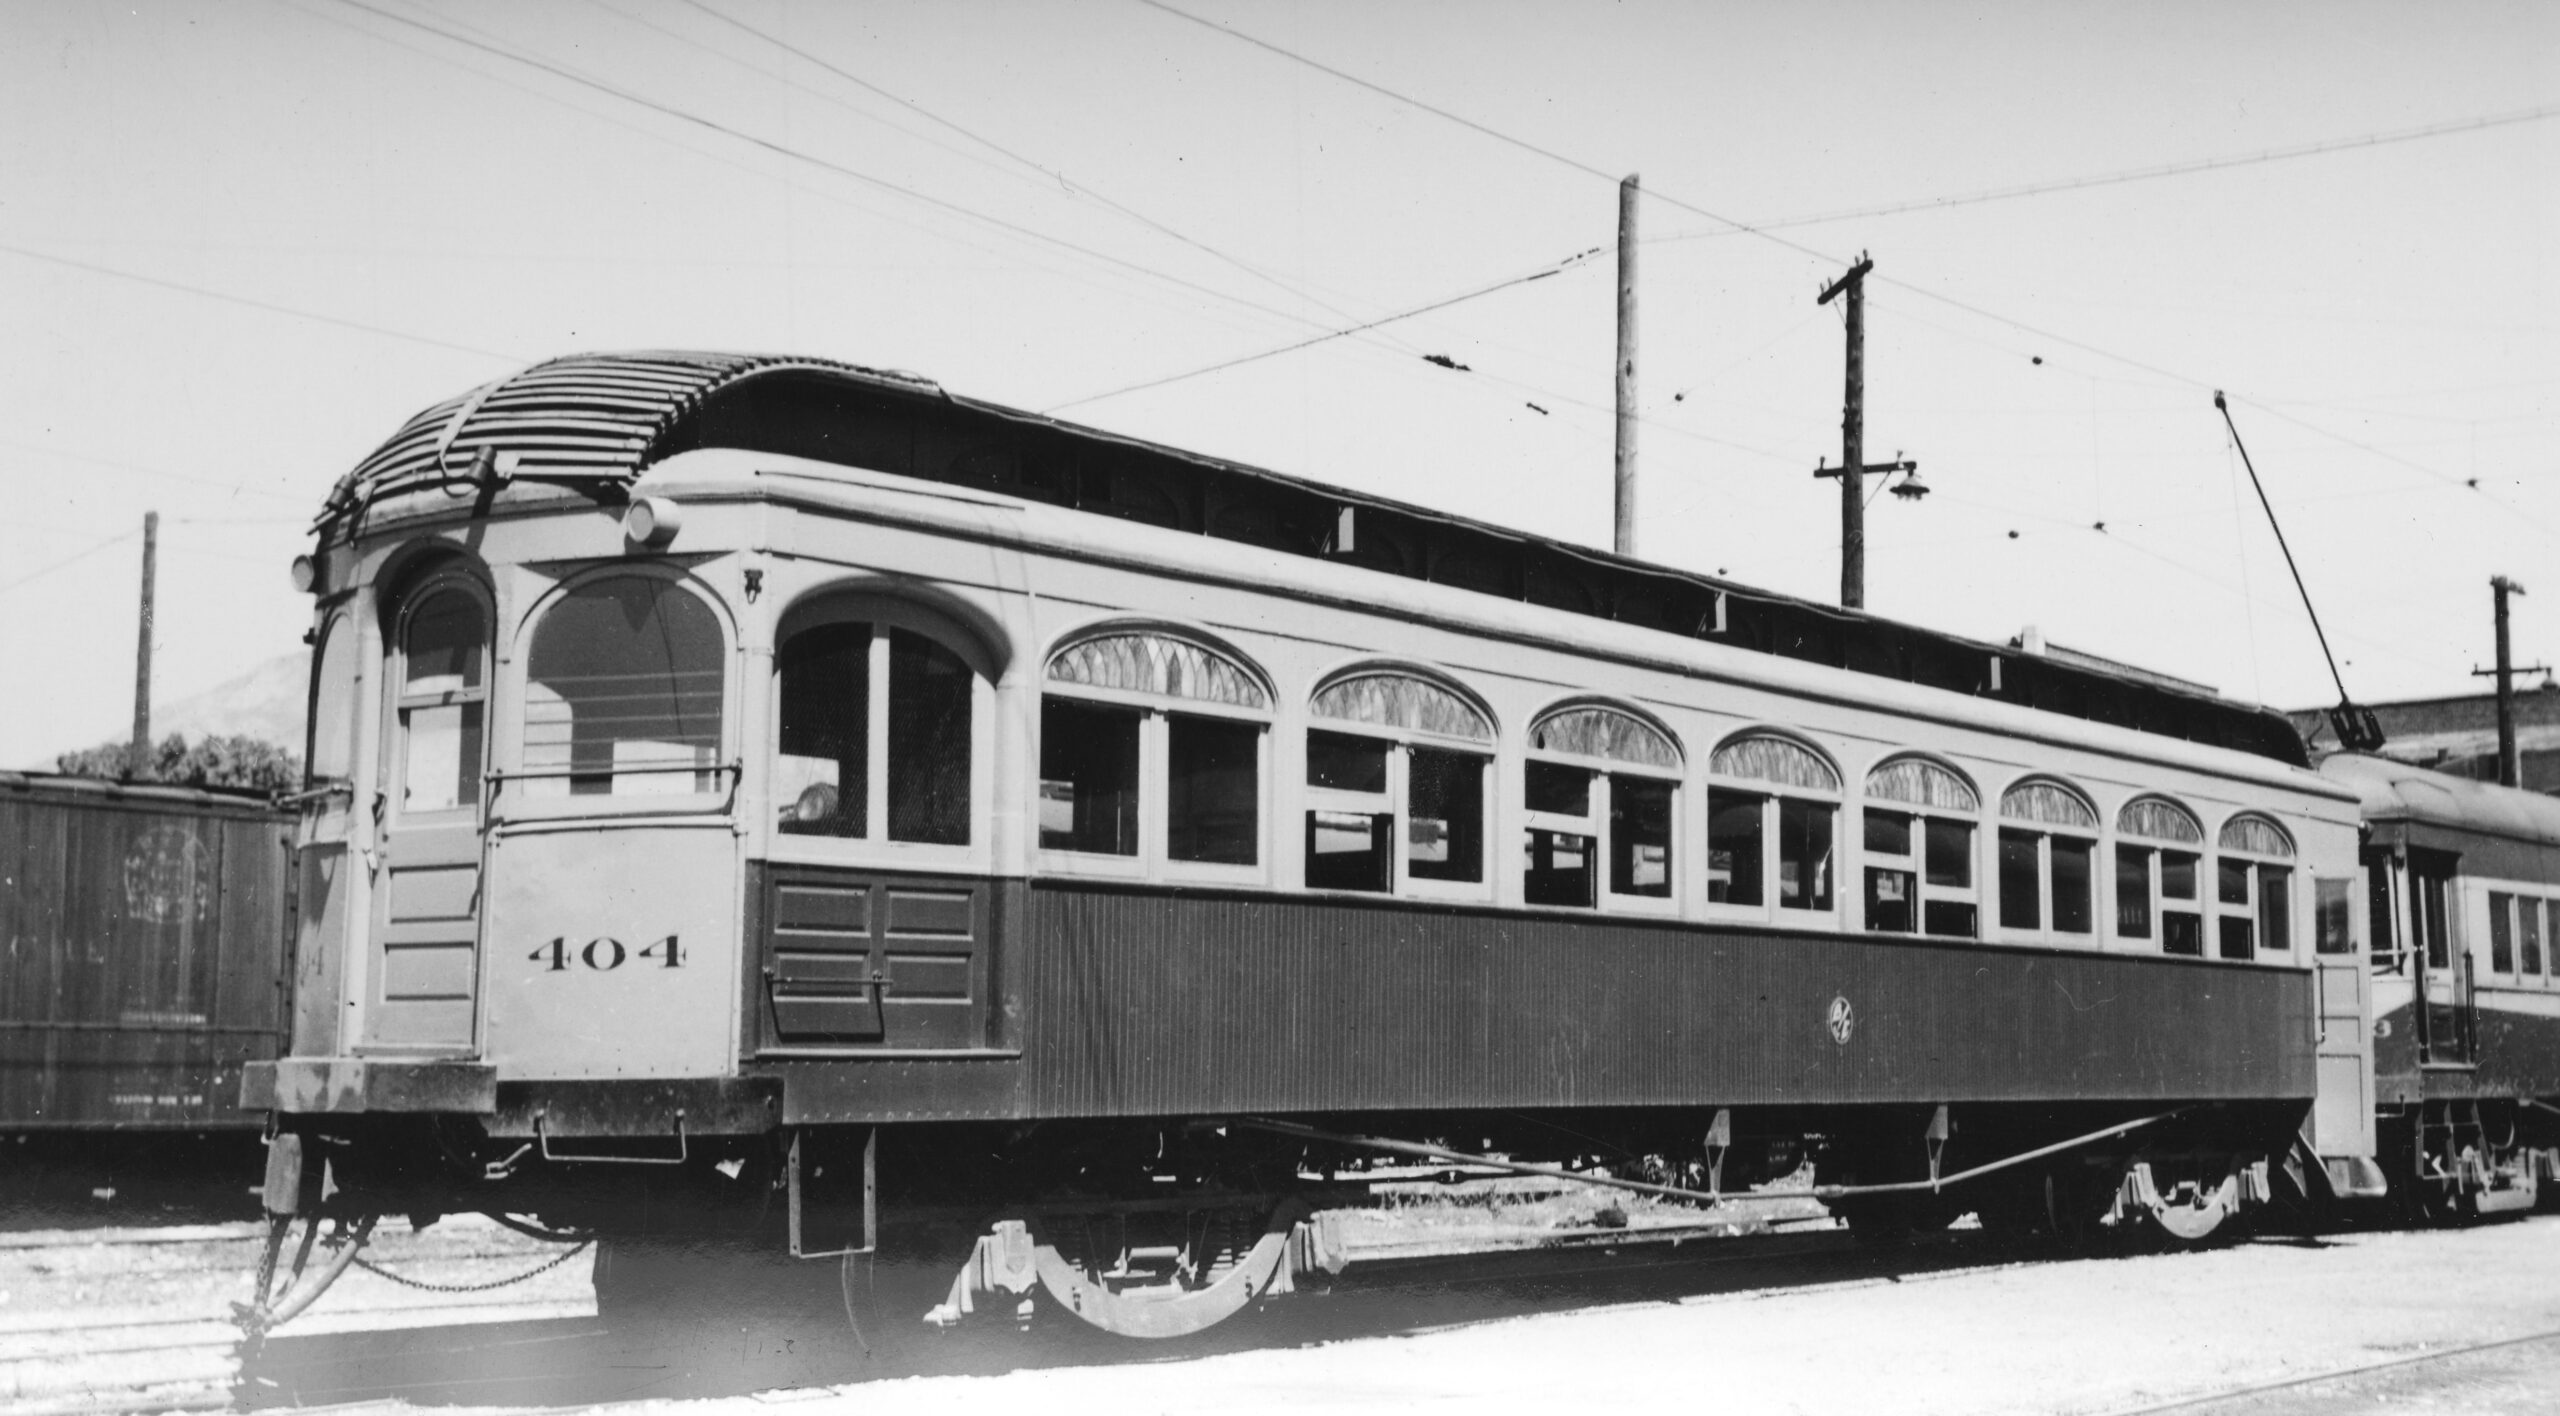 Bamberger Electric Railway | Ogden, Utah | Trailer car #404 | Niles Car & Manufacturing Company | August 1936 | D.W. Thickens photo | Elmer Kremkow Collectipn